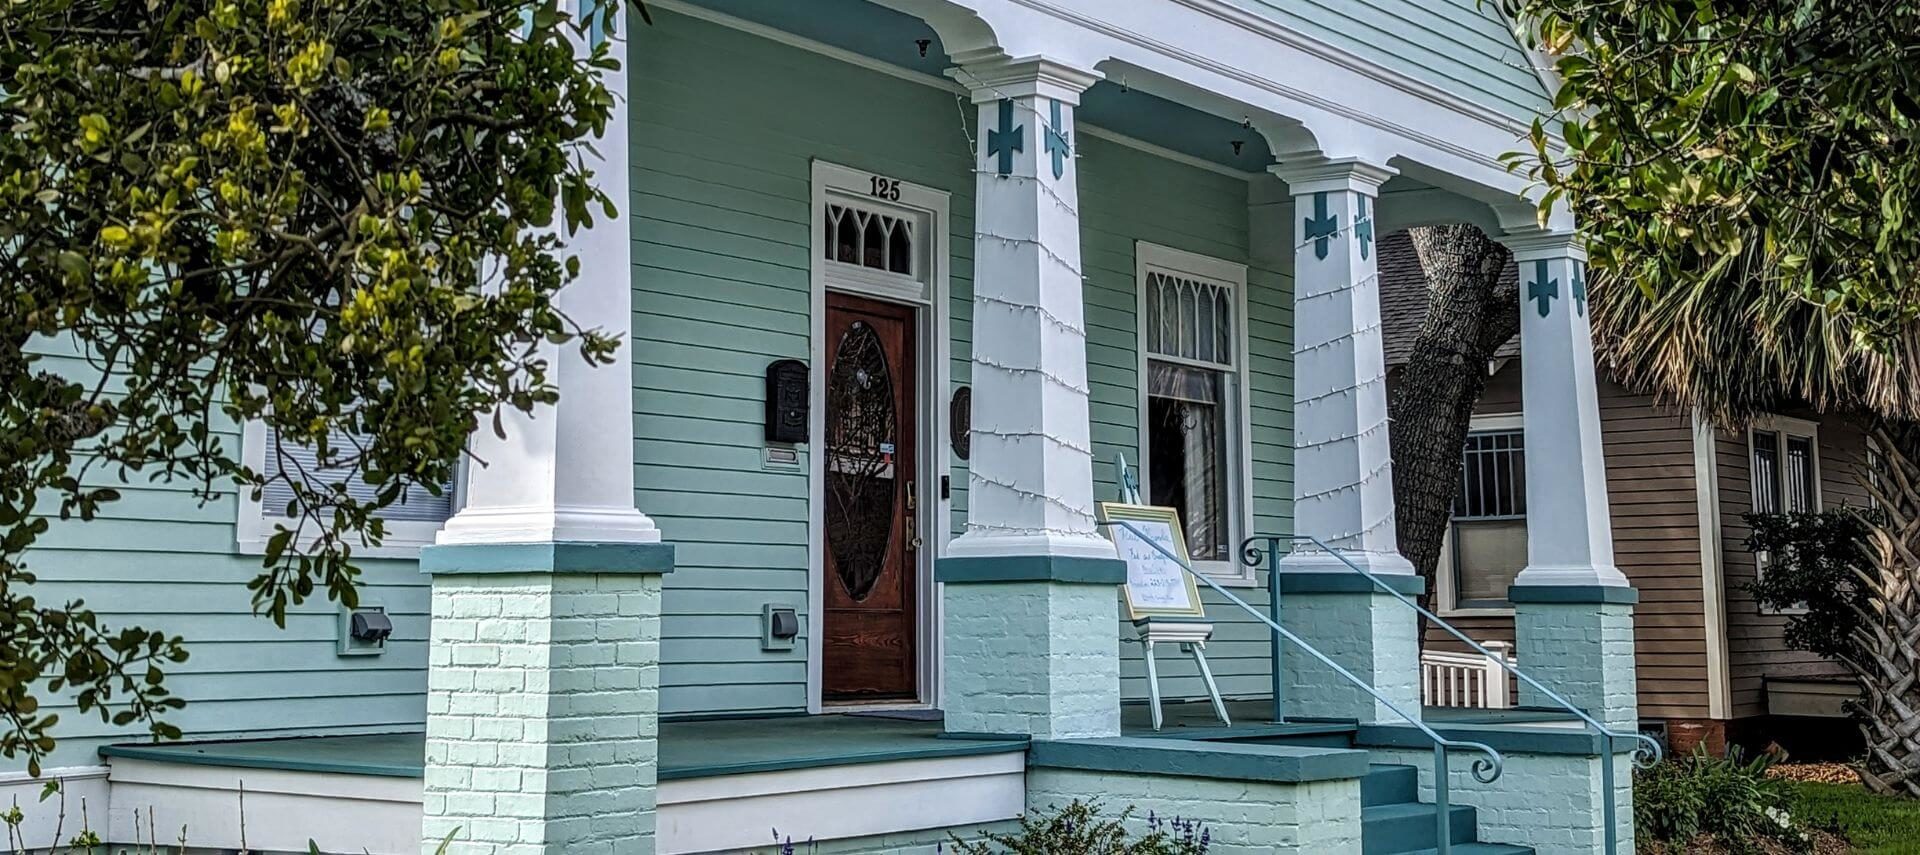 A light green Victorian front porch with white pillars and green bushes